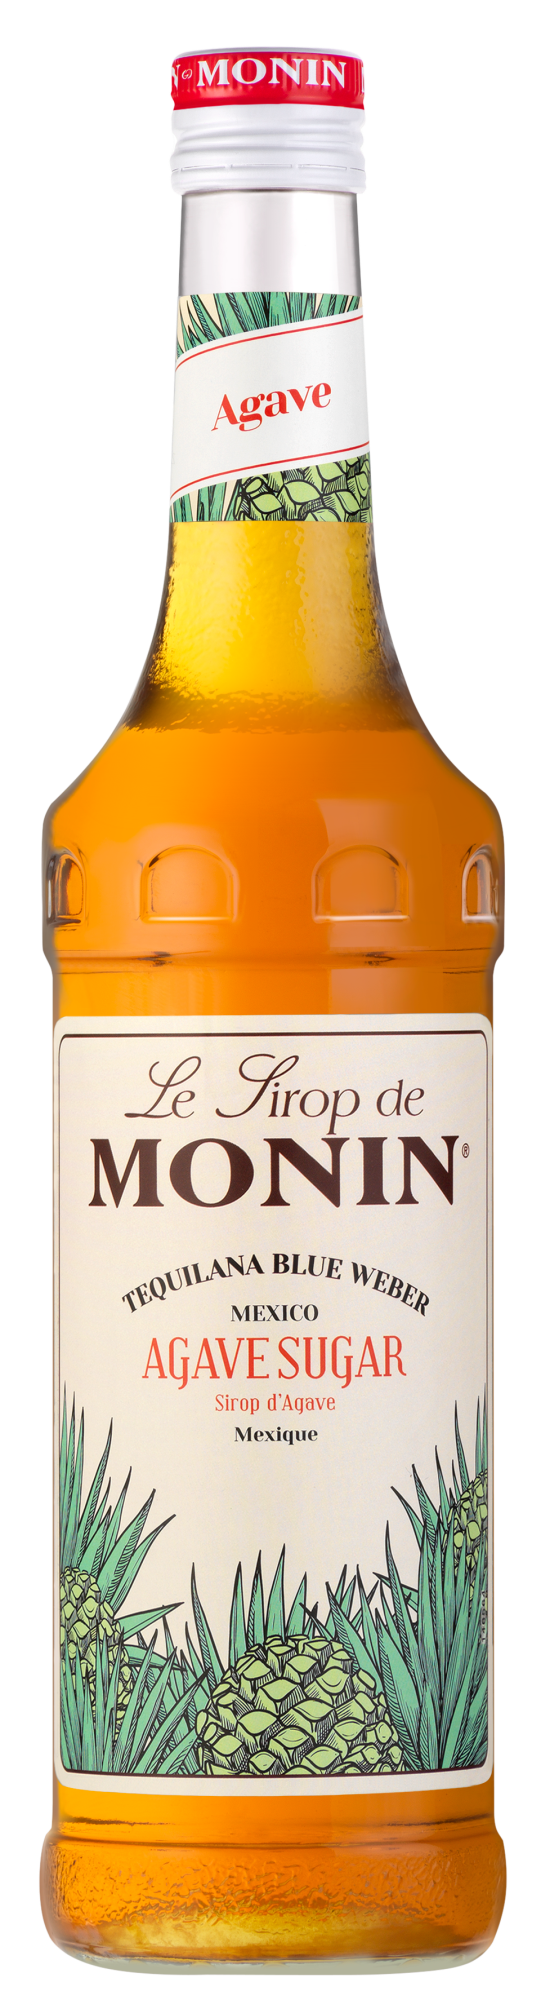 Buy MONIN Agave Syrup. It captures the rich, natural honeyed flavour of Agave. 